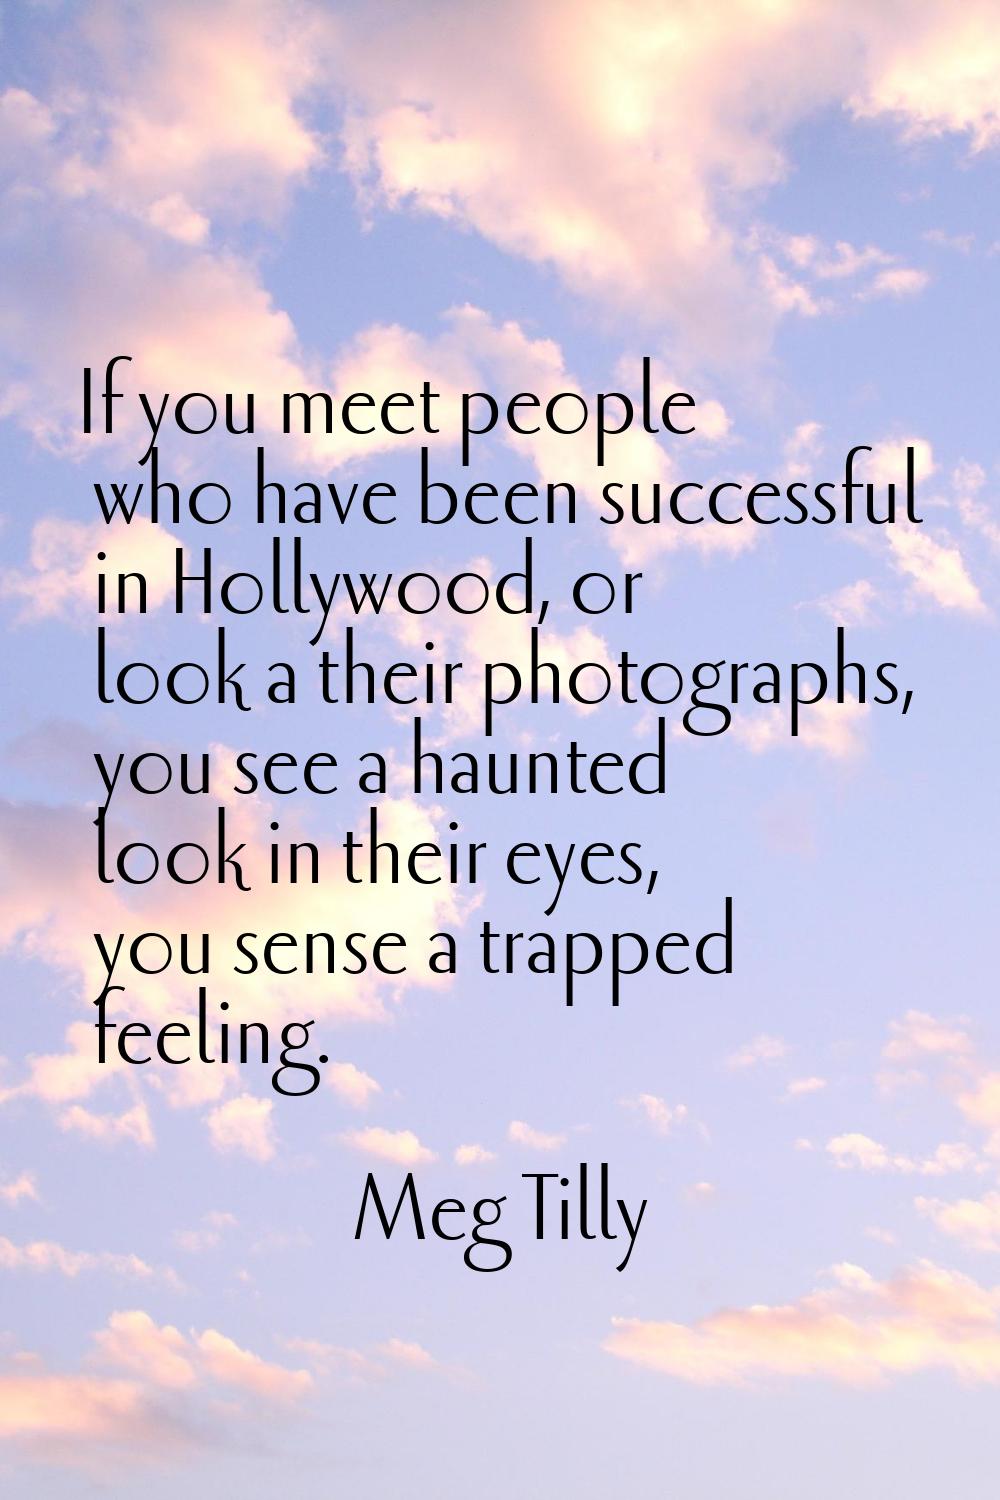 If you meet people who have been successful in Hollywood, or look a their photographs, you see a ha